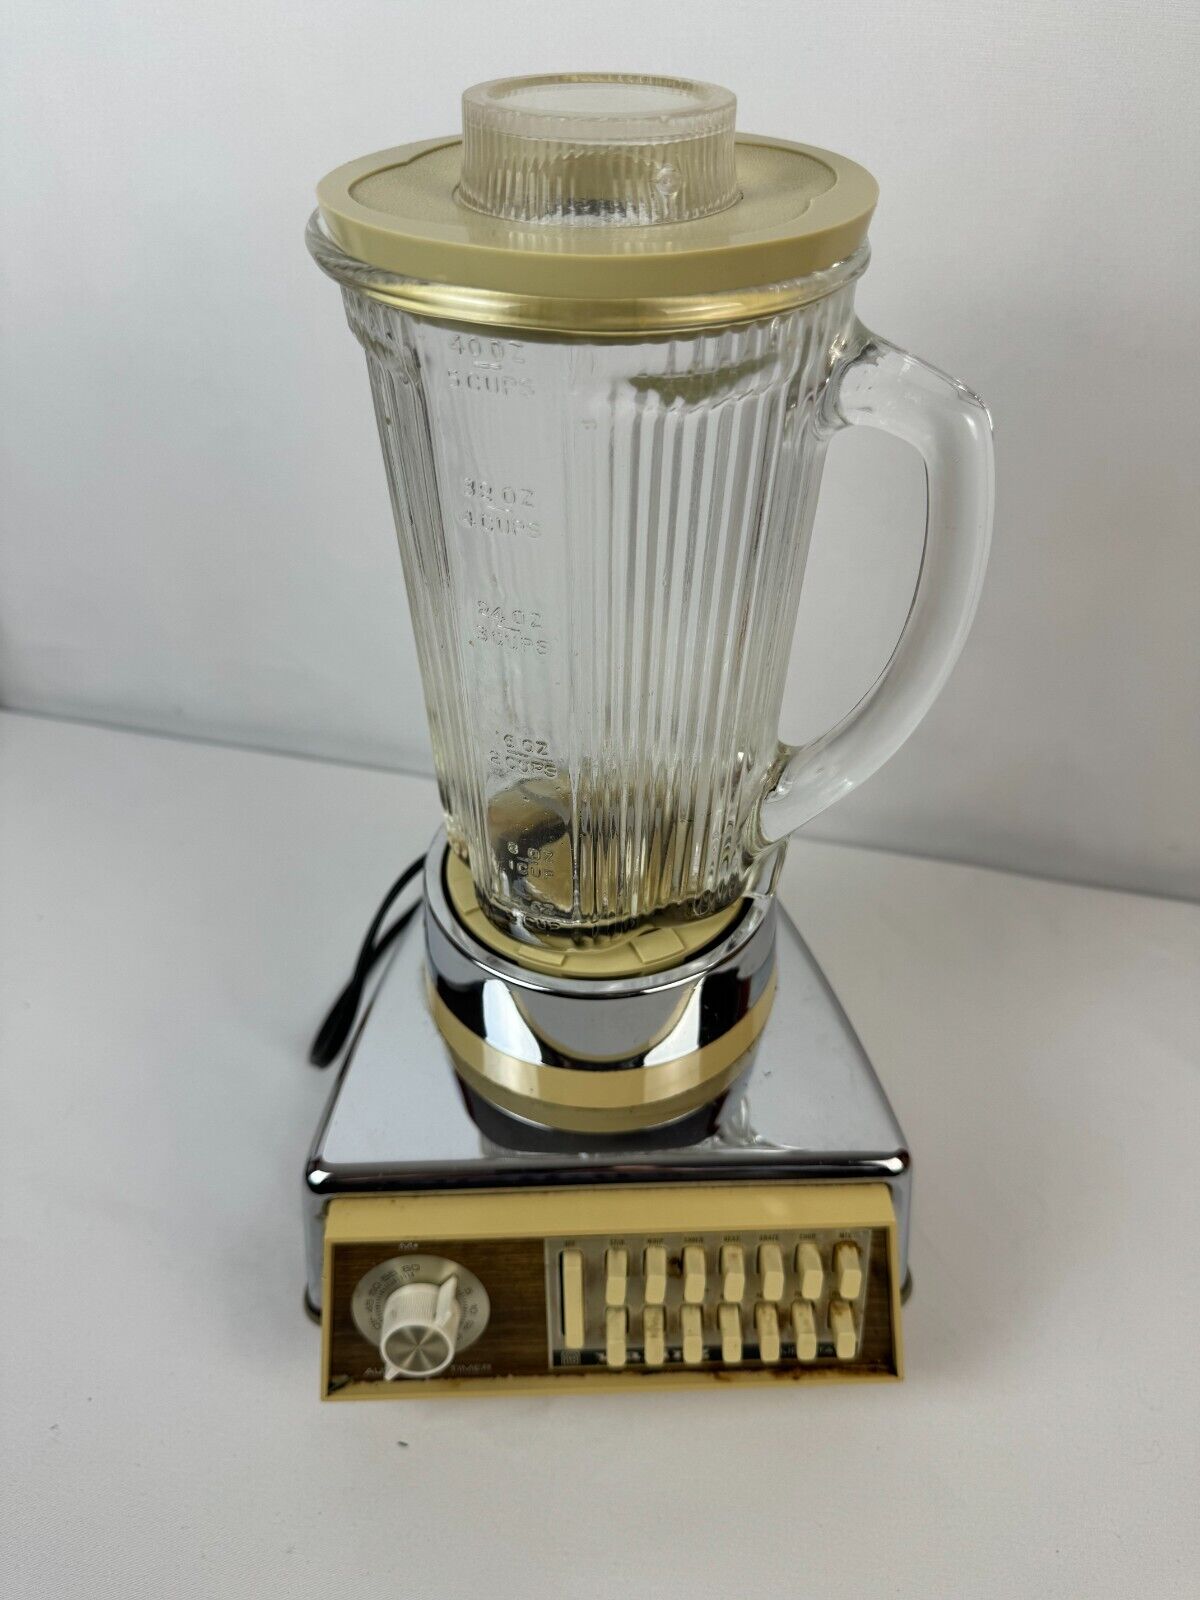 Vintage 70's Waring Solid State Blender Model #11–183 Silver Body with Woodgrain